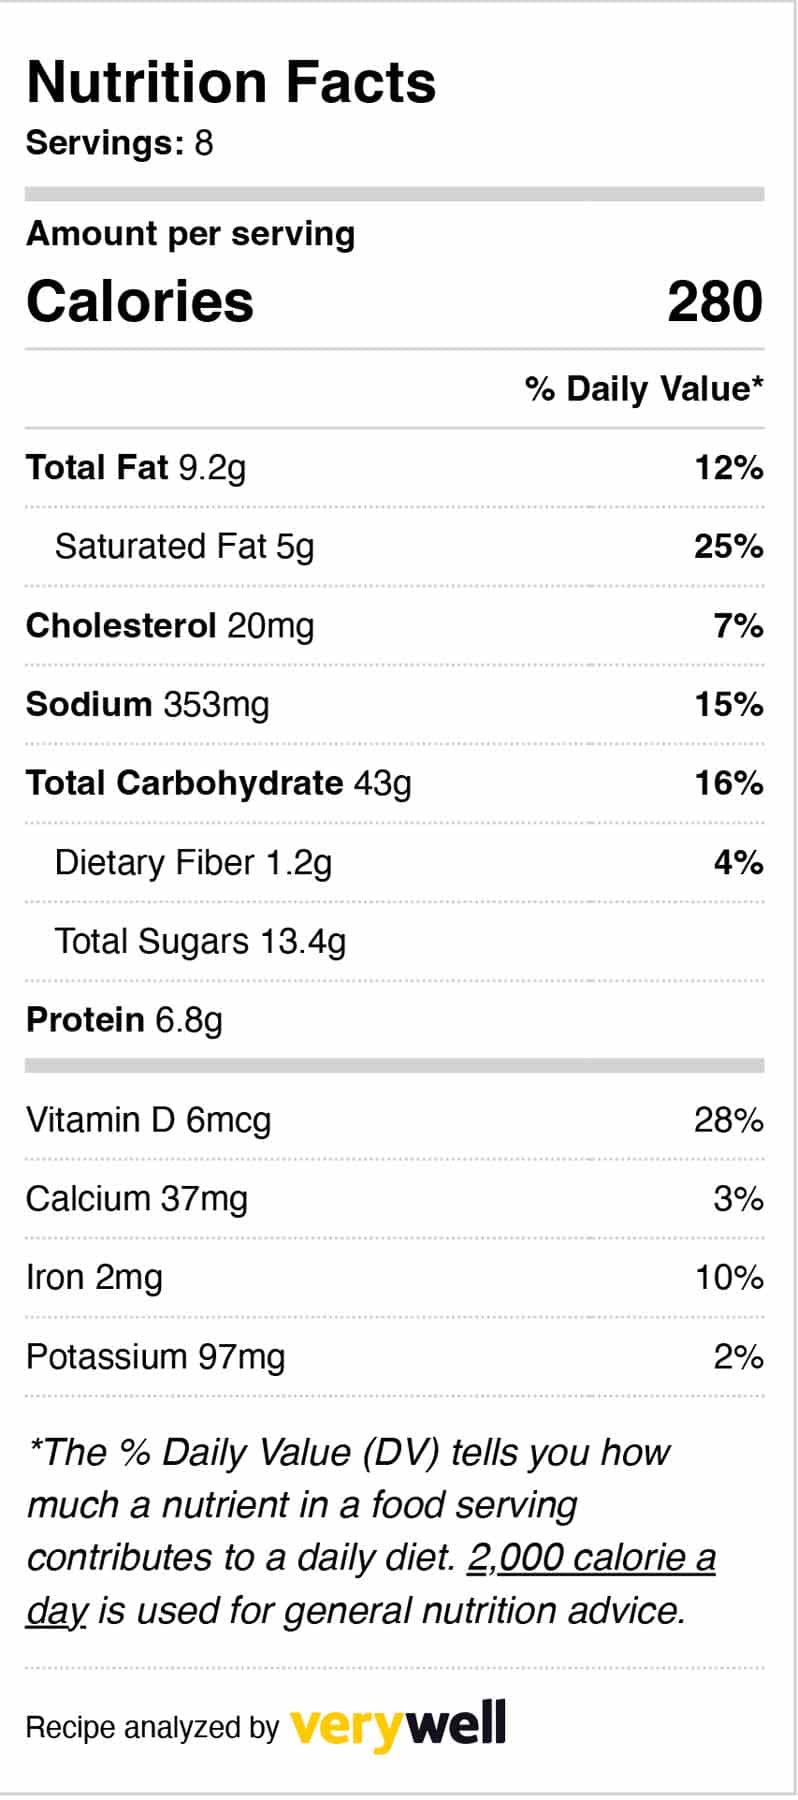 a table of nutrition facts giving information on calories etc.